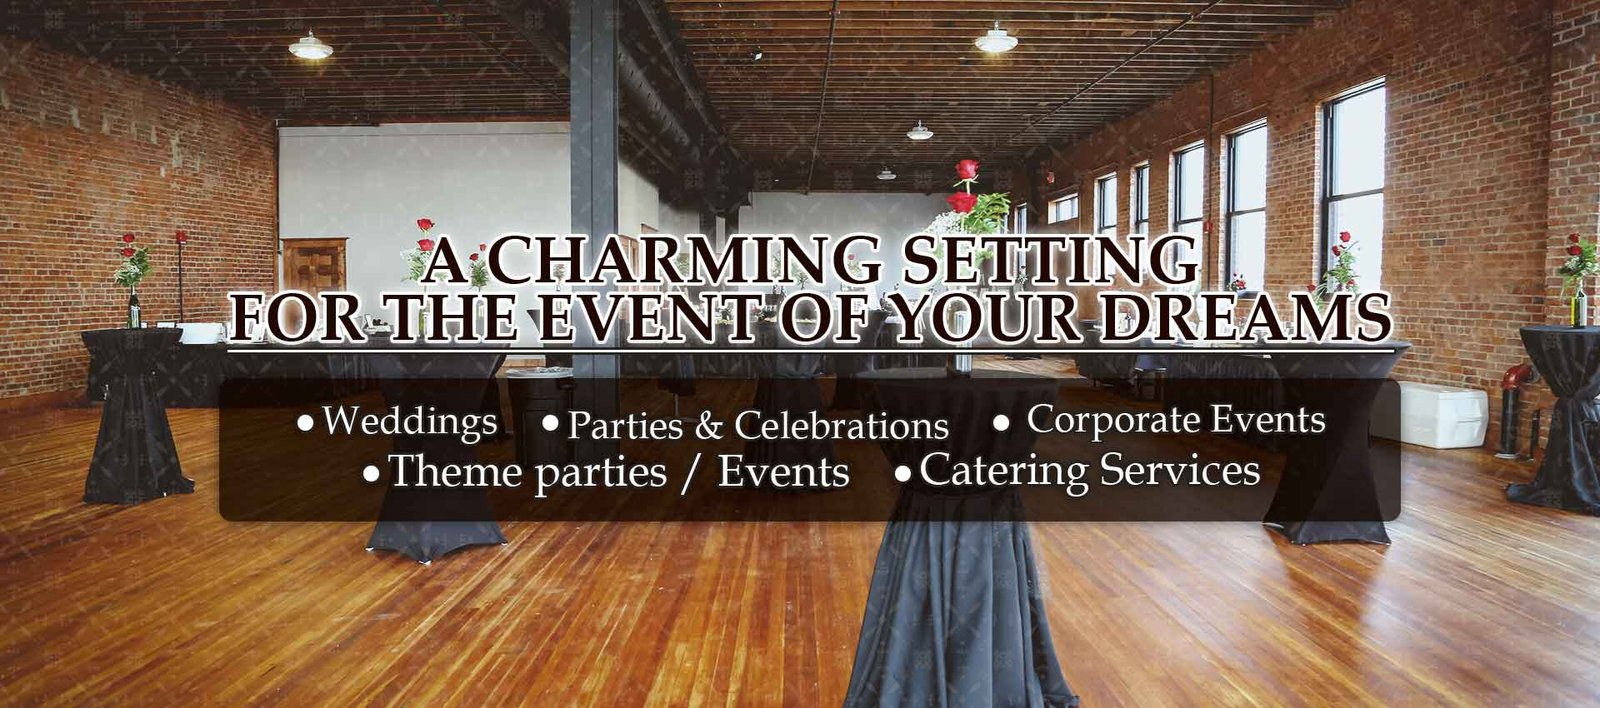 Party Hall Rentals in Lincoln NE